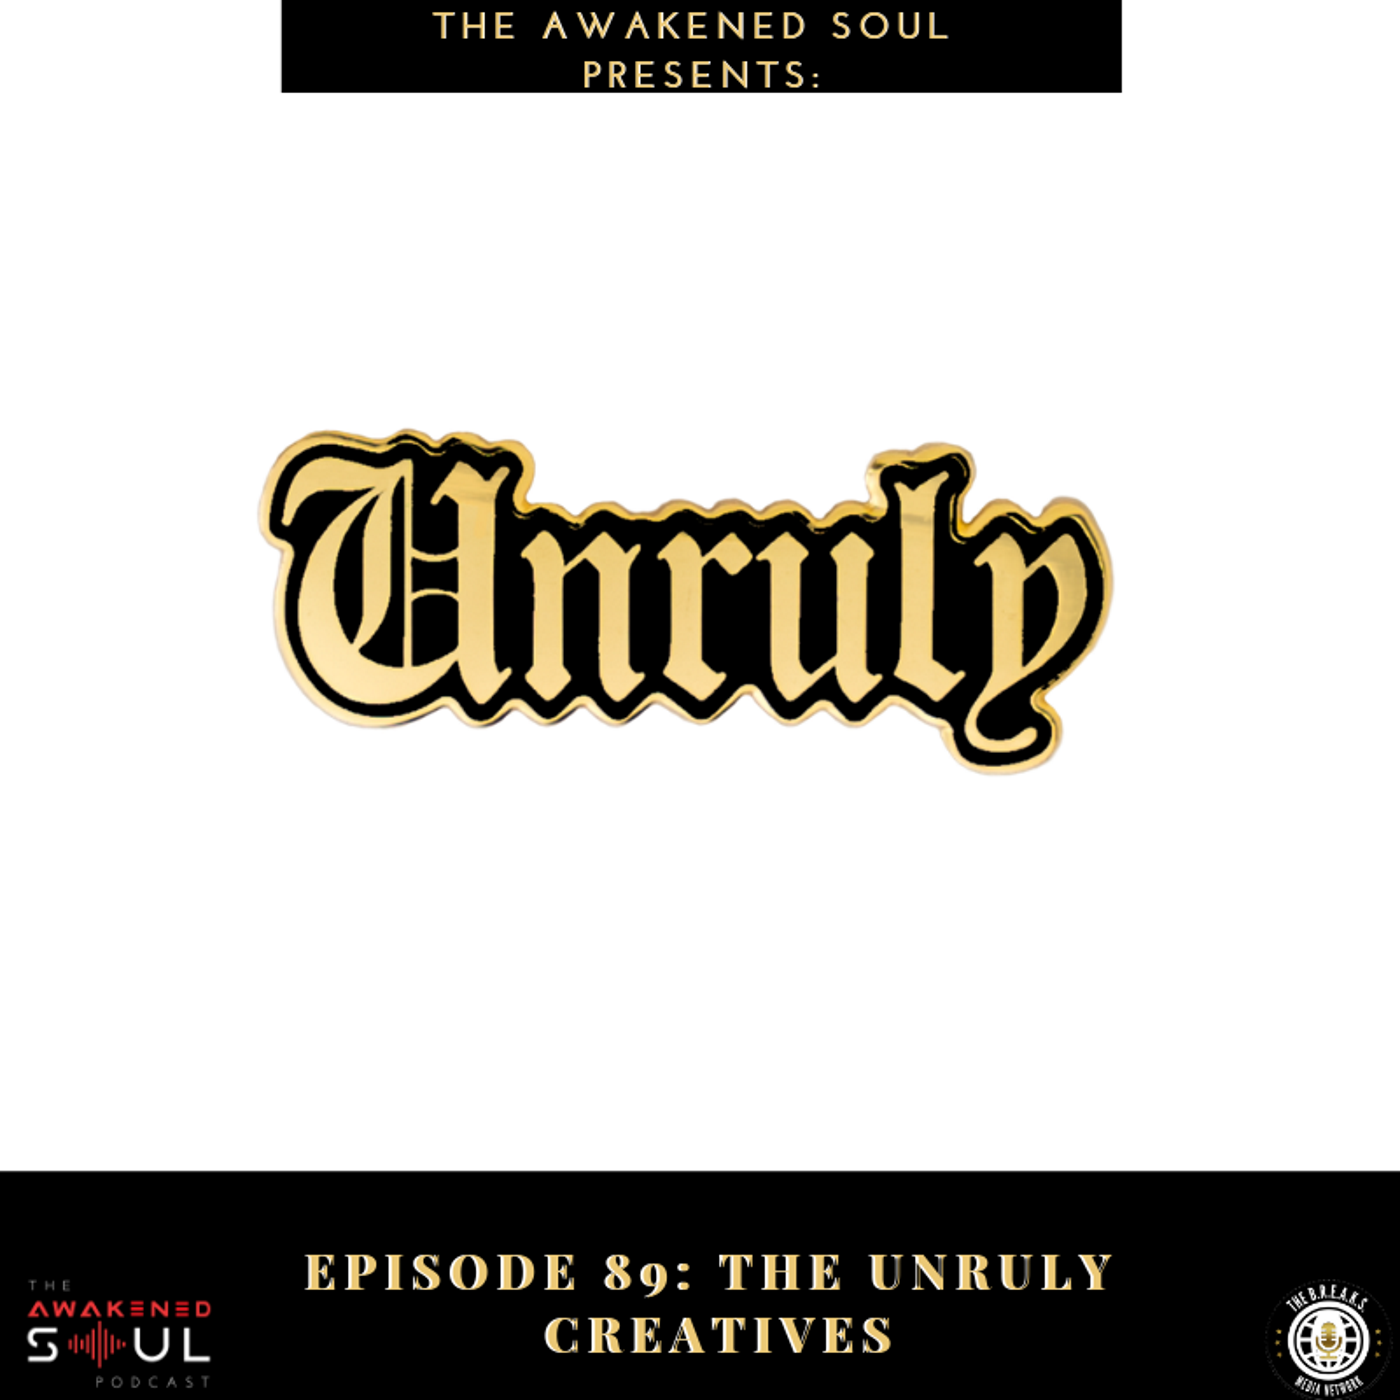 Episode 89: The Unruly Creatives